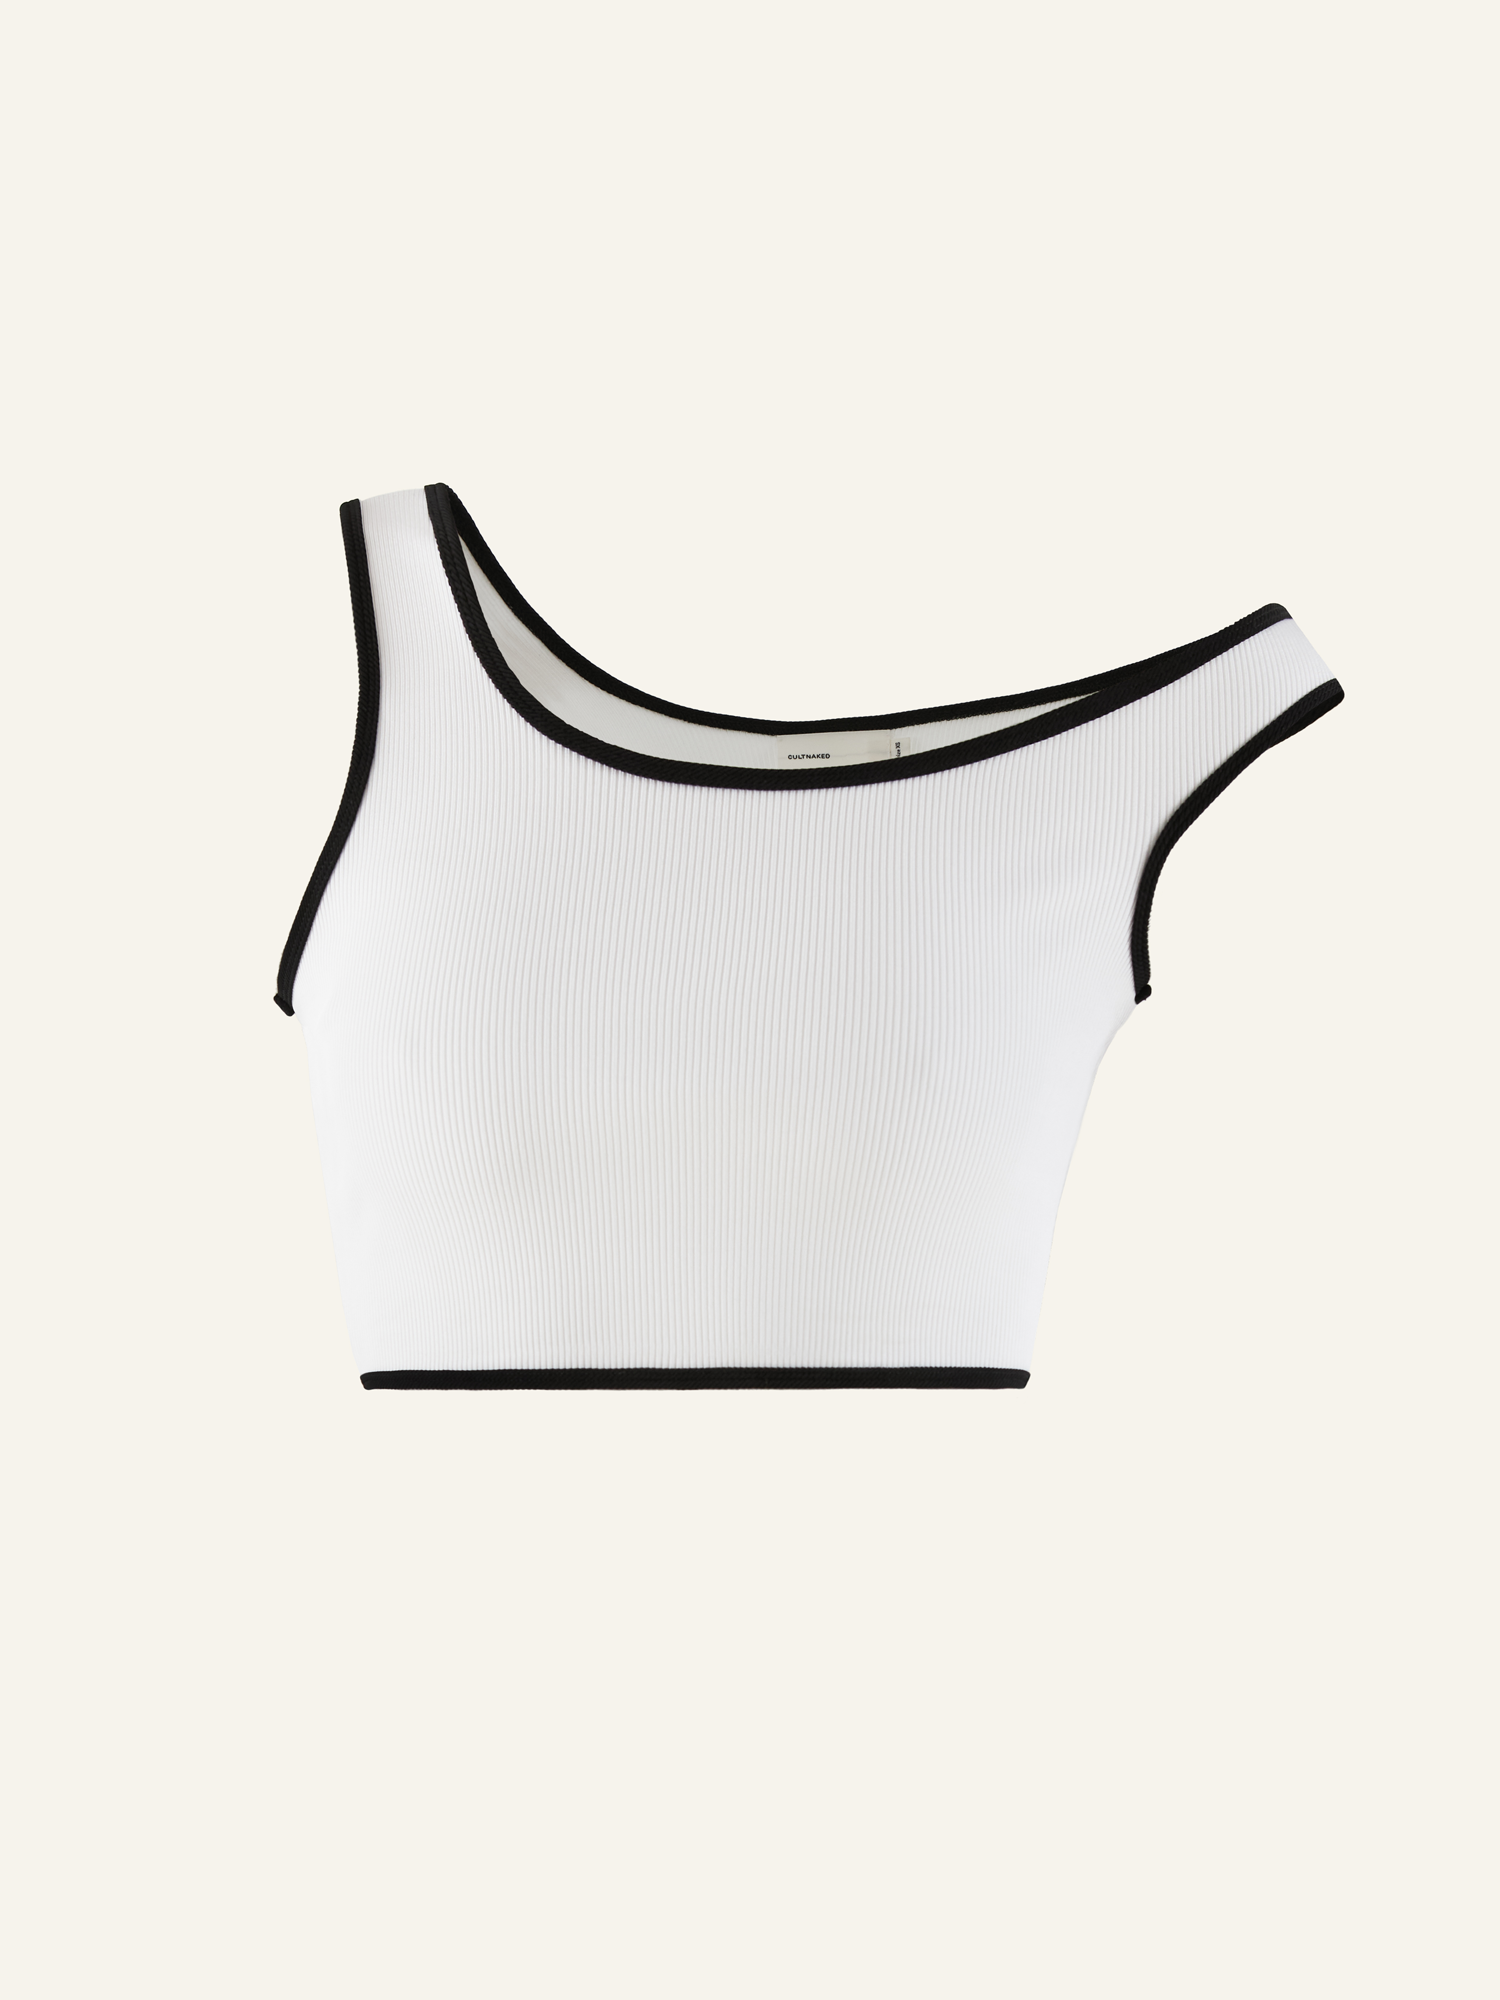 Product photo of a white viscose crop top